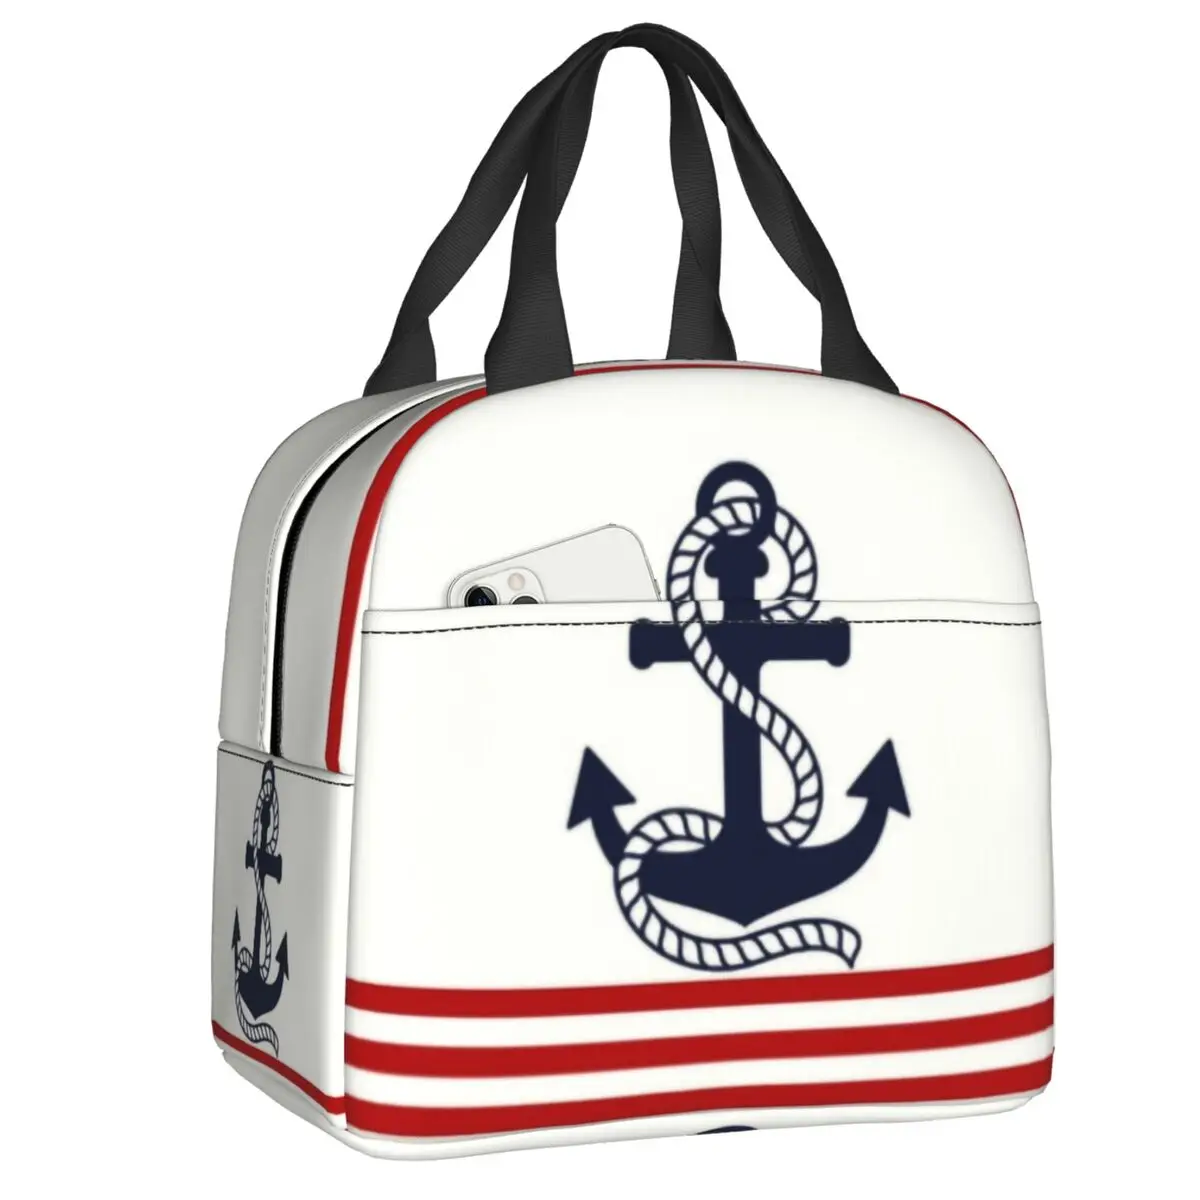 Navy Blue Stripes Nautical Anchor Boat Insulated Lunch Tote Bag for Women Resuable Cooler Thermal Food Lunch Box Camping Travel